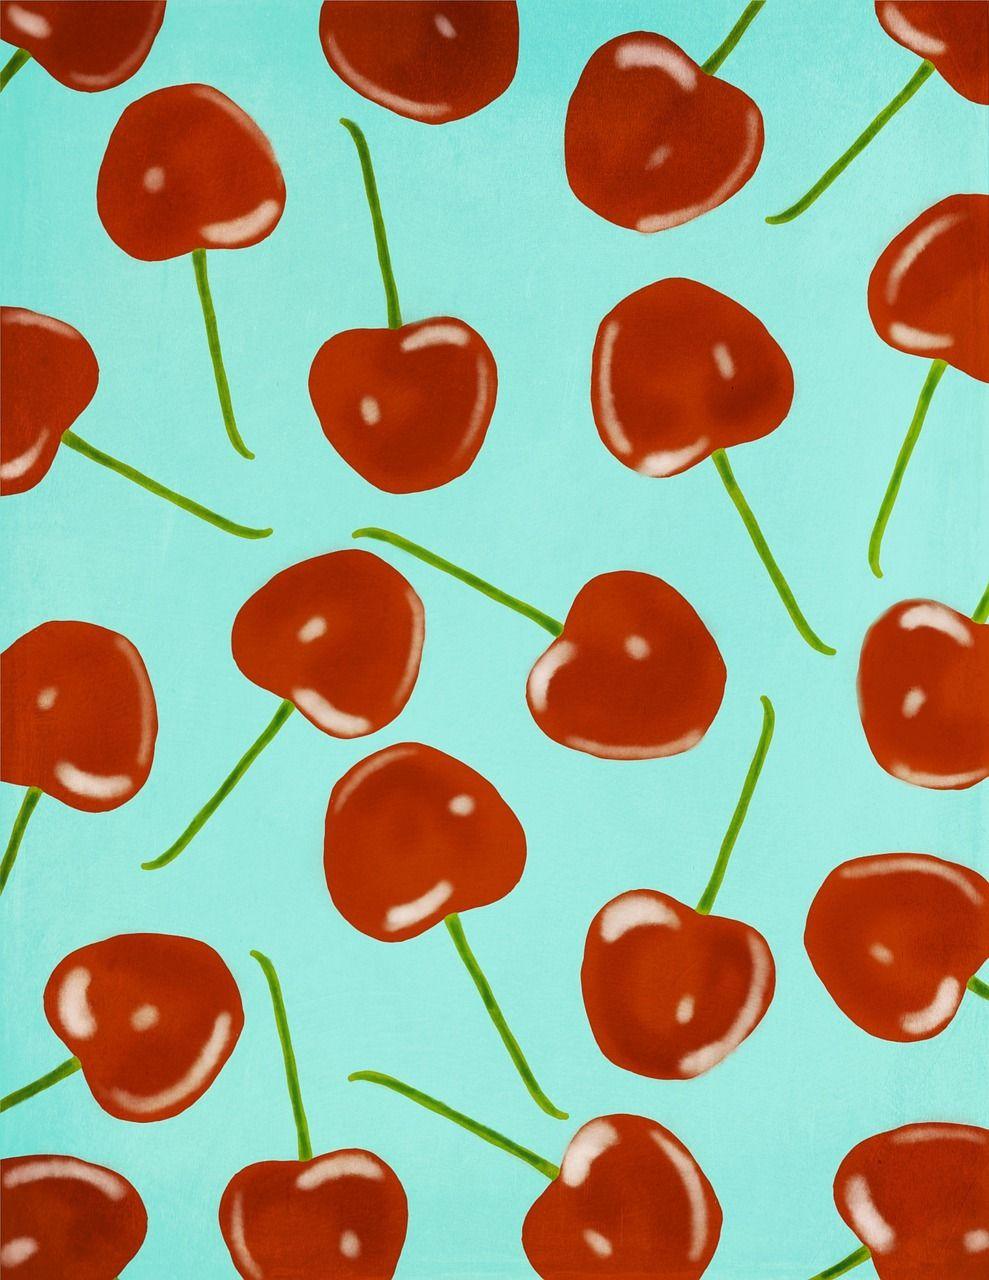 Cherry Aesthetic Wallpapers - Top Free Cherry Aesthetic Backgrounds